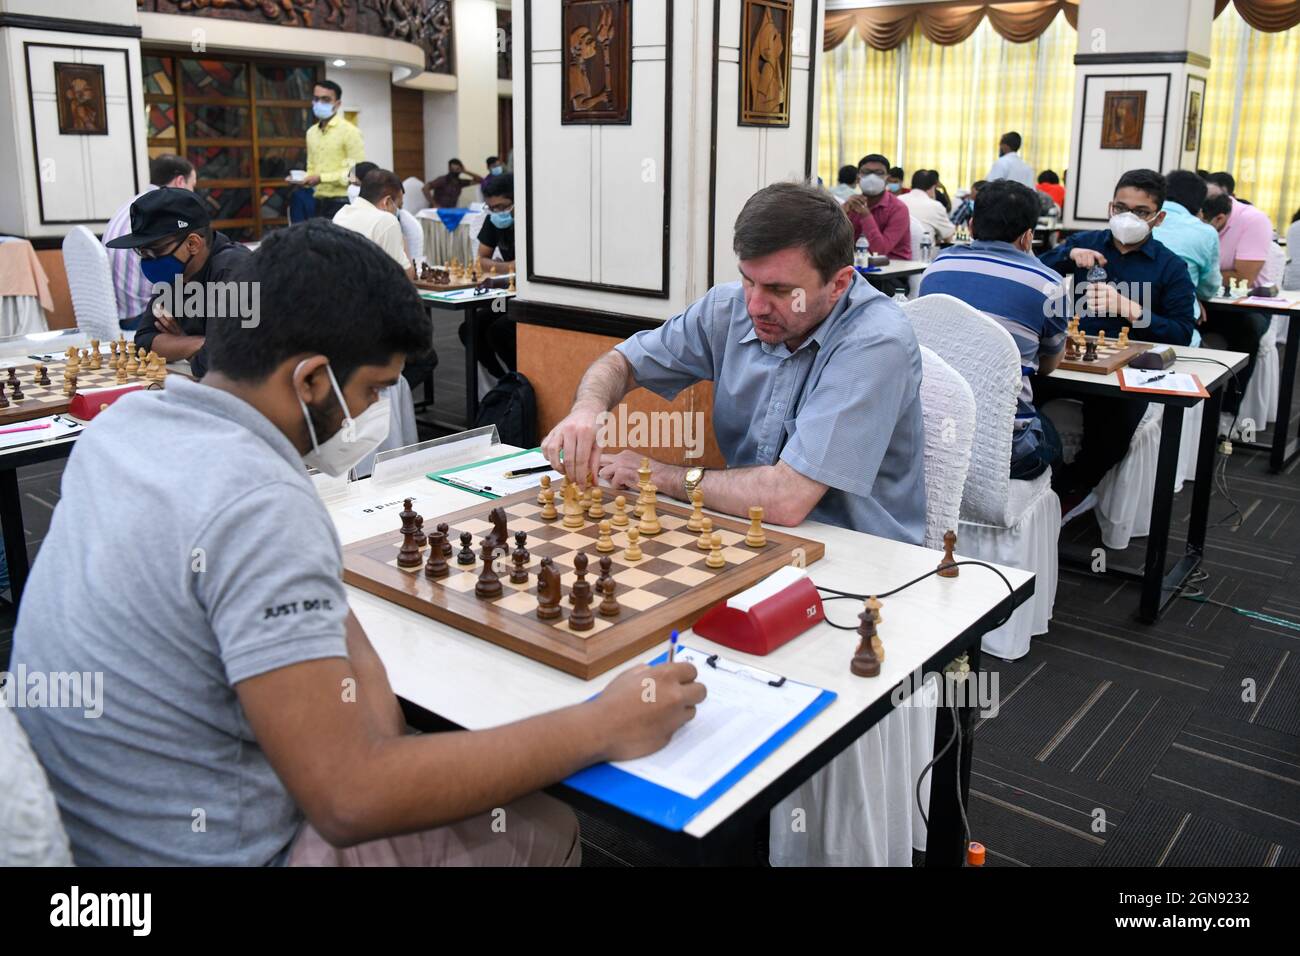 When will Bangladesh get its next Grand Master in chess?